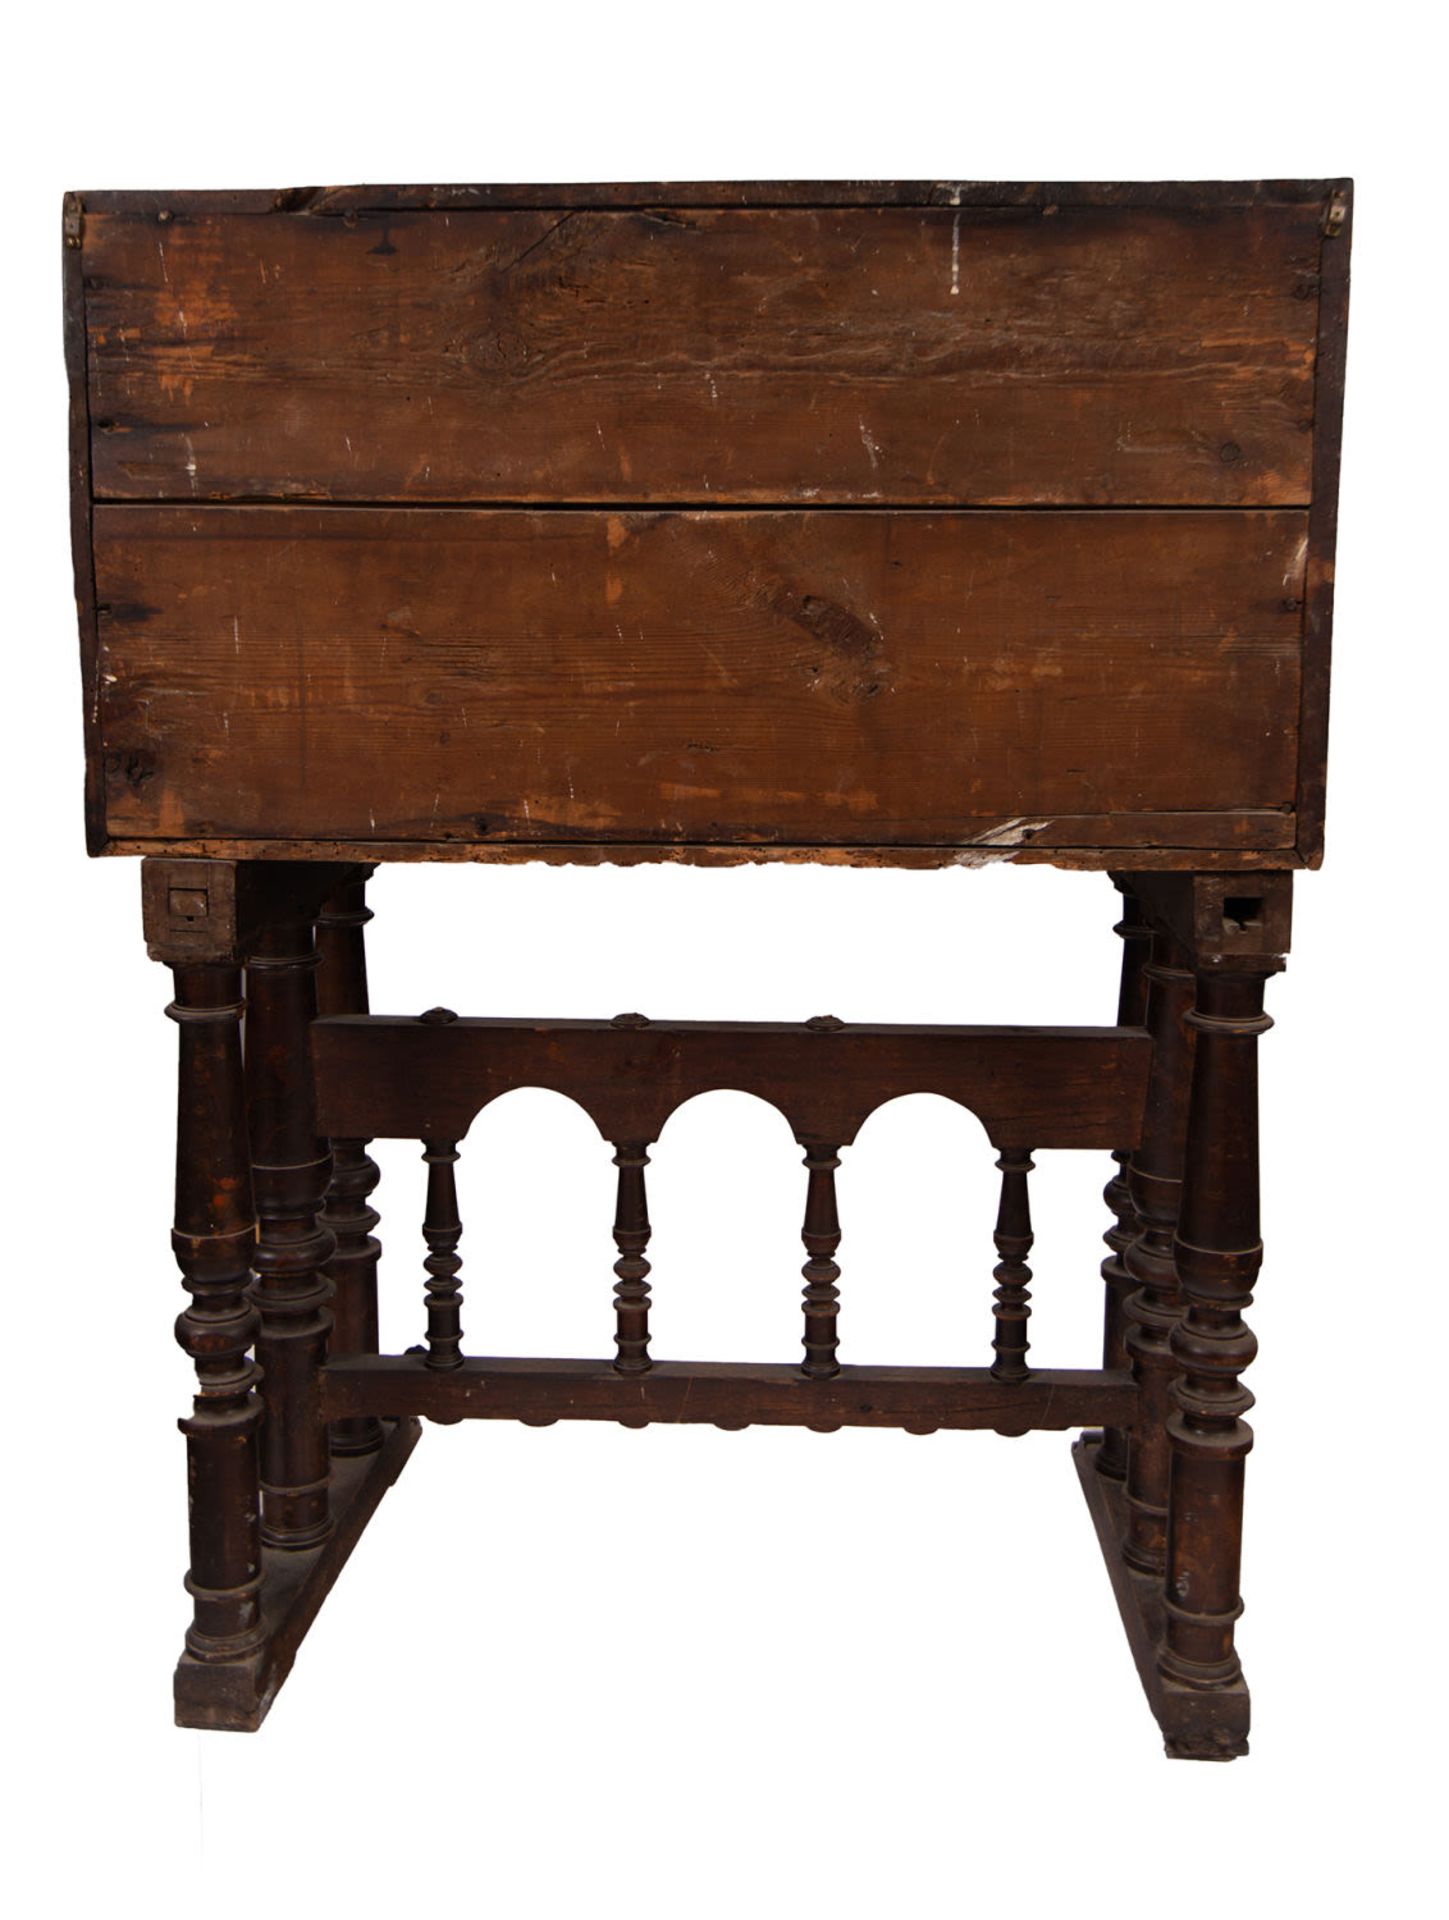 Important Spanish-Flemish cabinet, in bone and marquetry, 17th century - Image 12 of 12